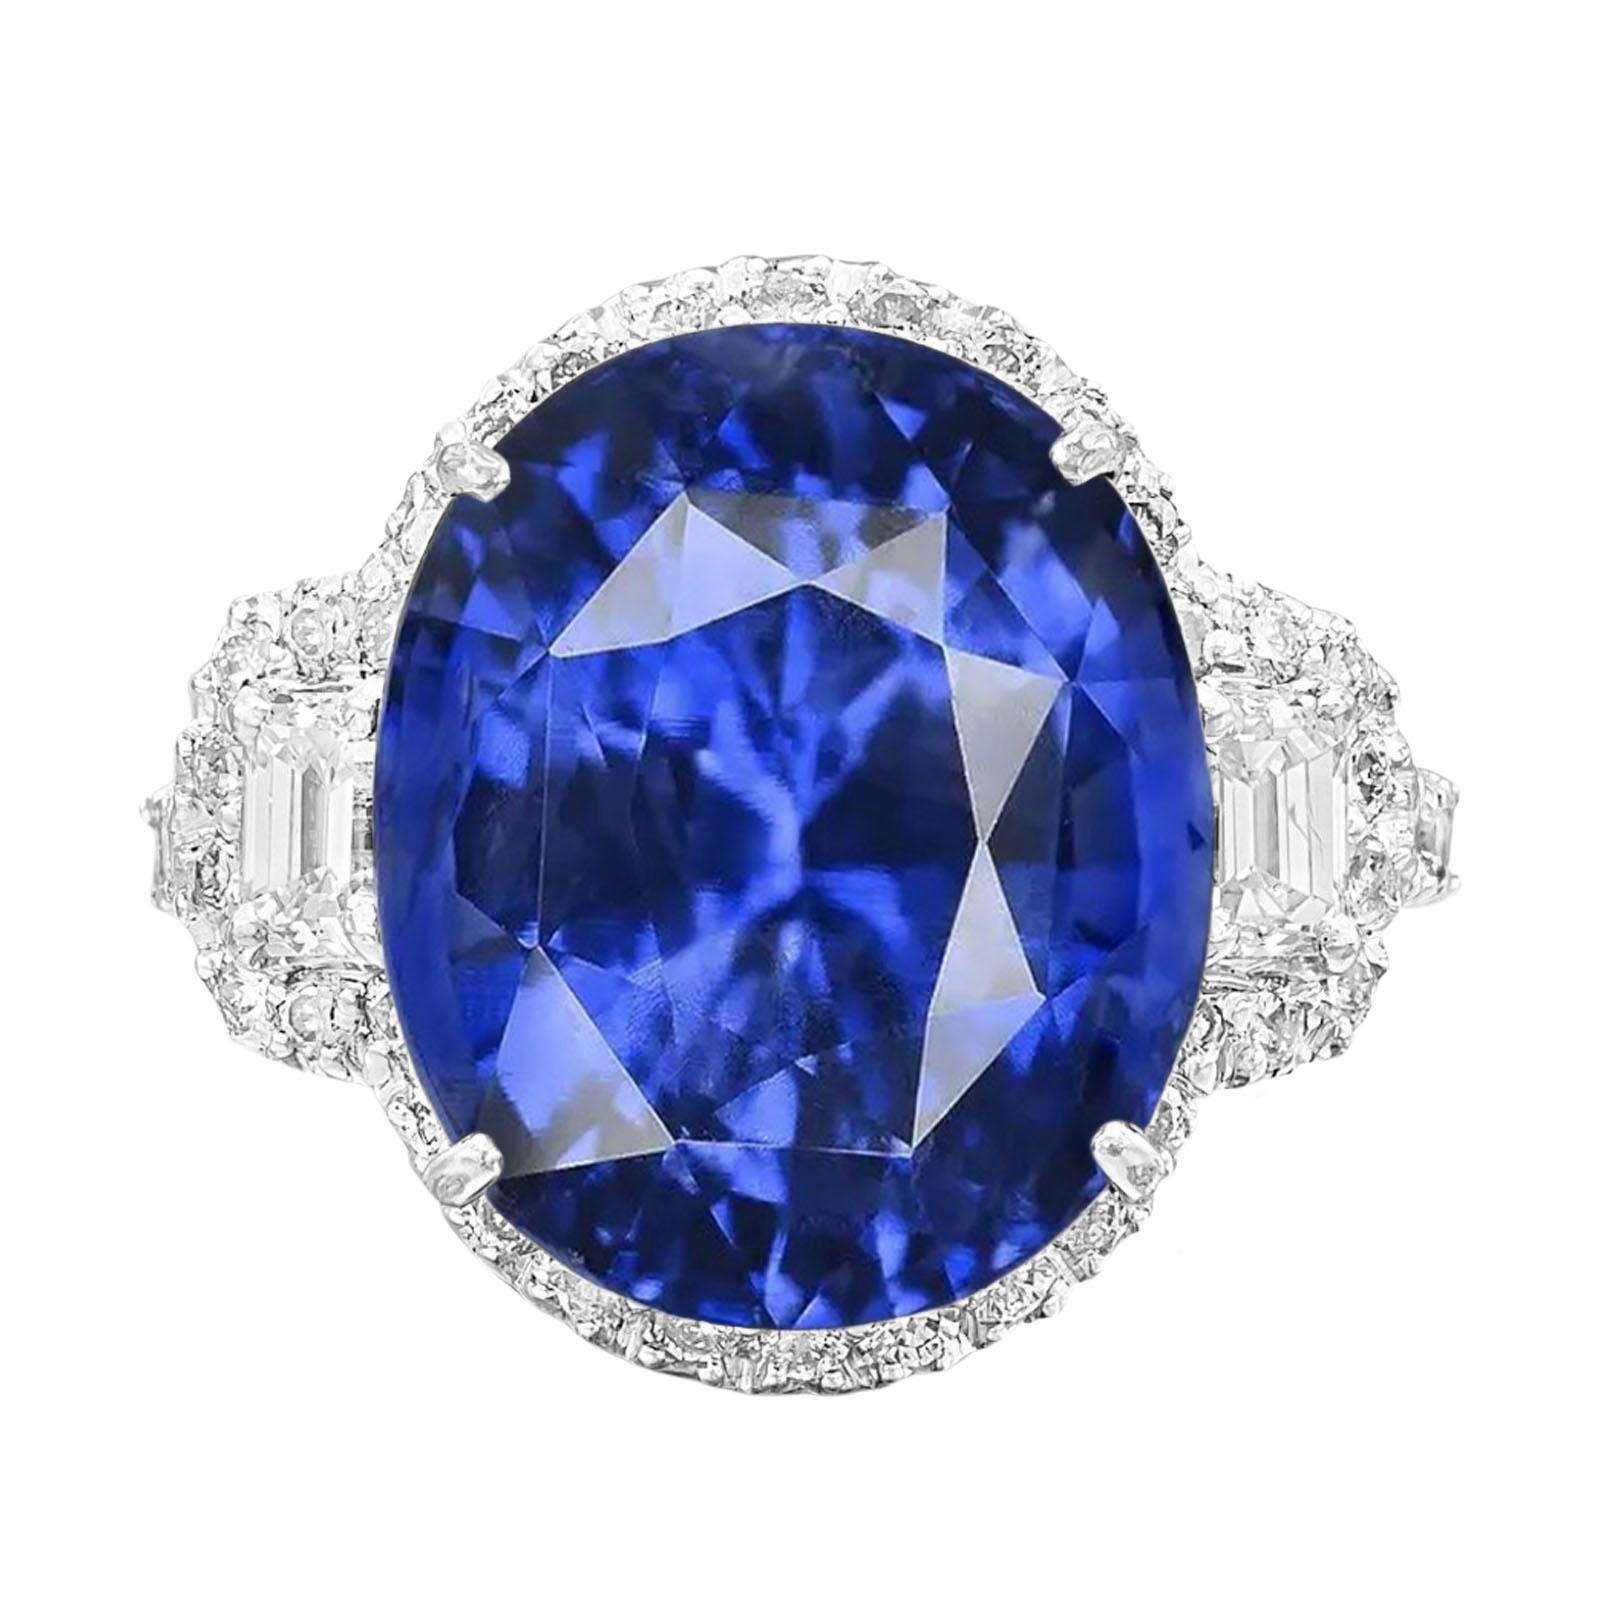 The breathtaking color and rarity of this natural, unheated Ceylon sapphire is perfectly presented in this ring by famed italian jeweler Antinori di Sanpietro ROMA. 

This unenhanced Ceylon sapphire with no evidence of heat treatments and has been